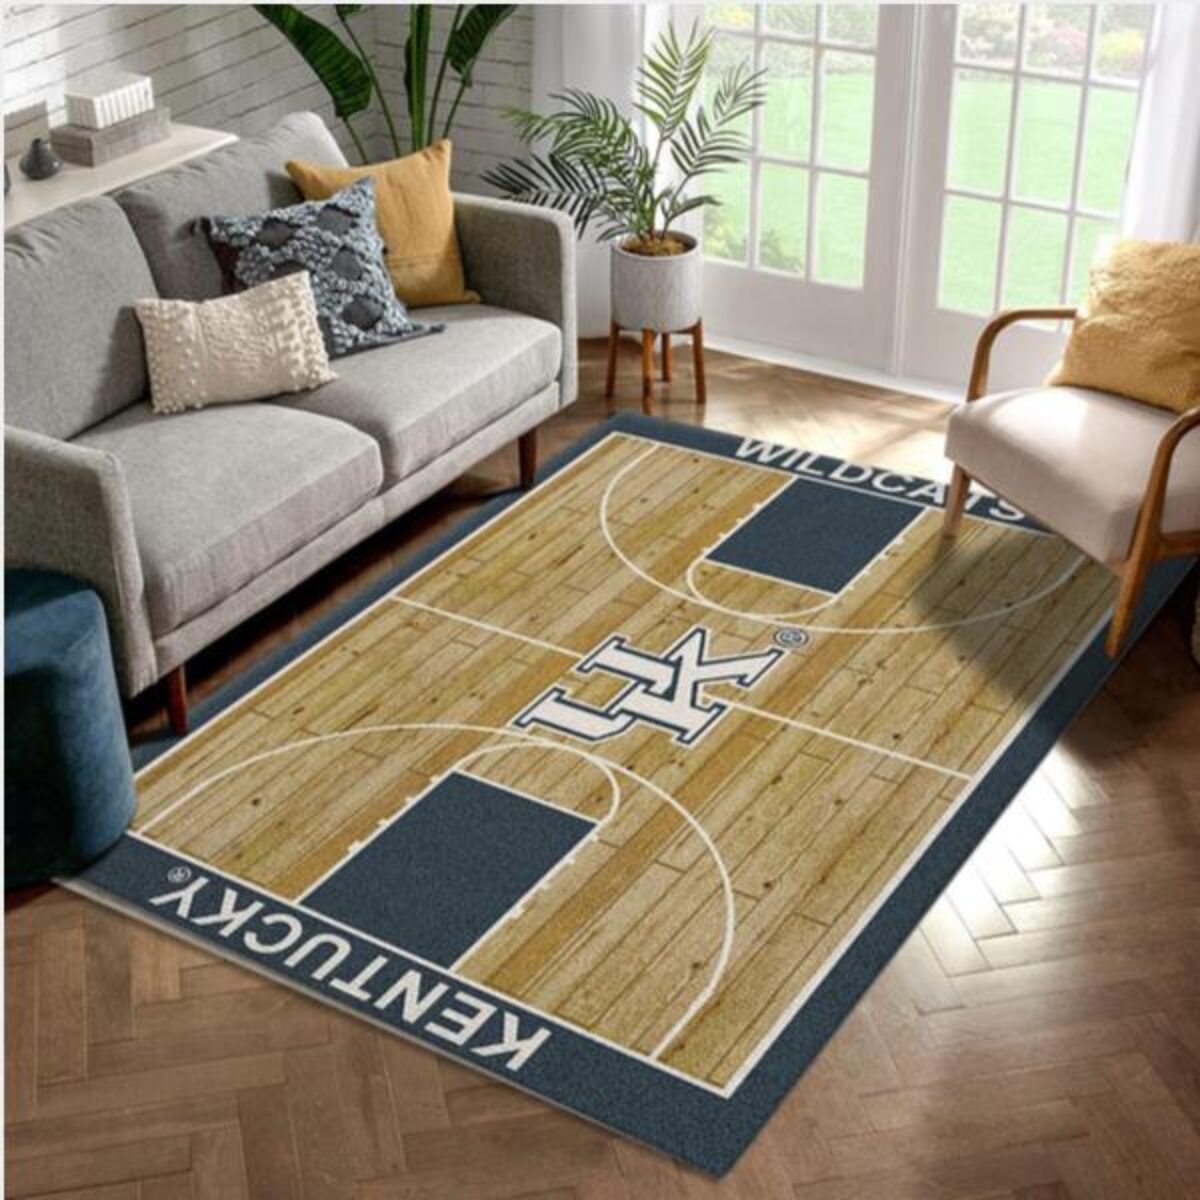 Officially Licensed NCAA Mascot Rug - University of Louisville